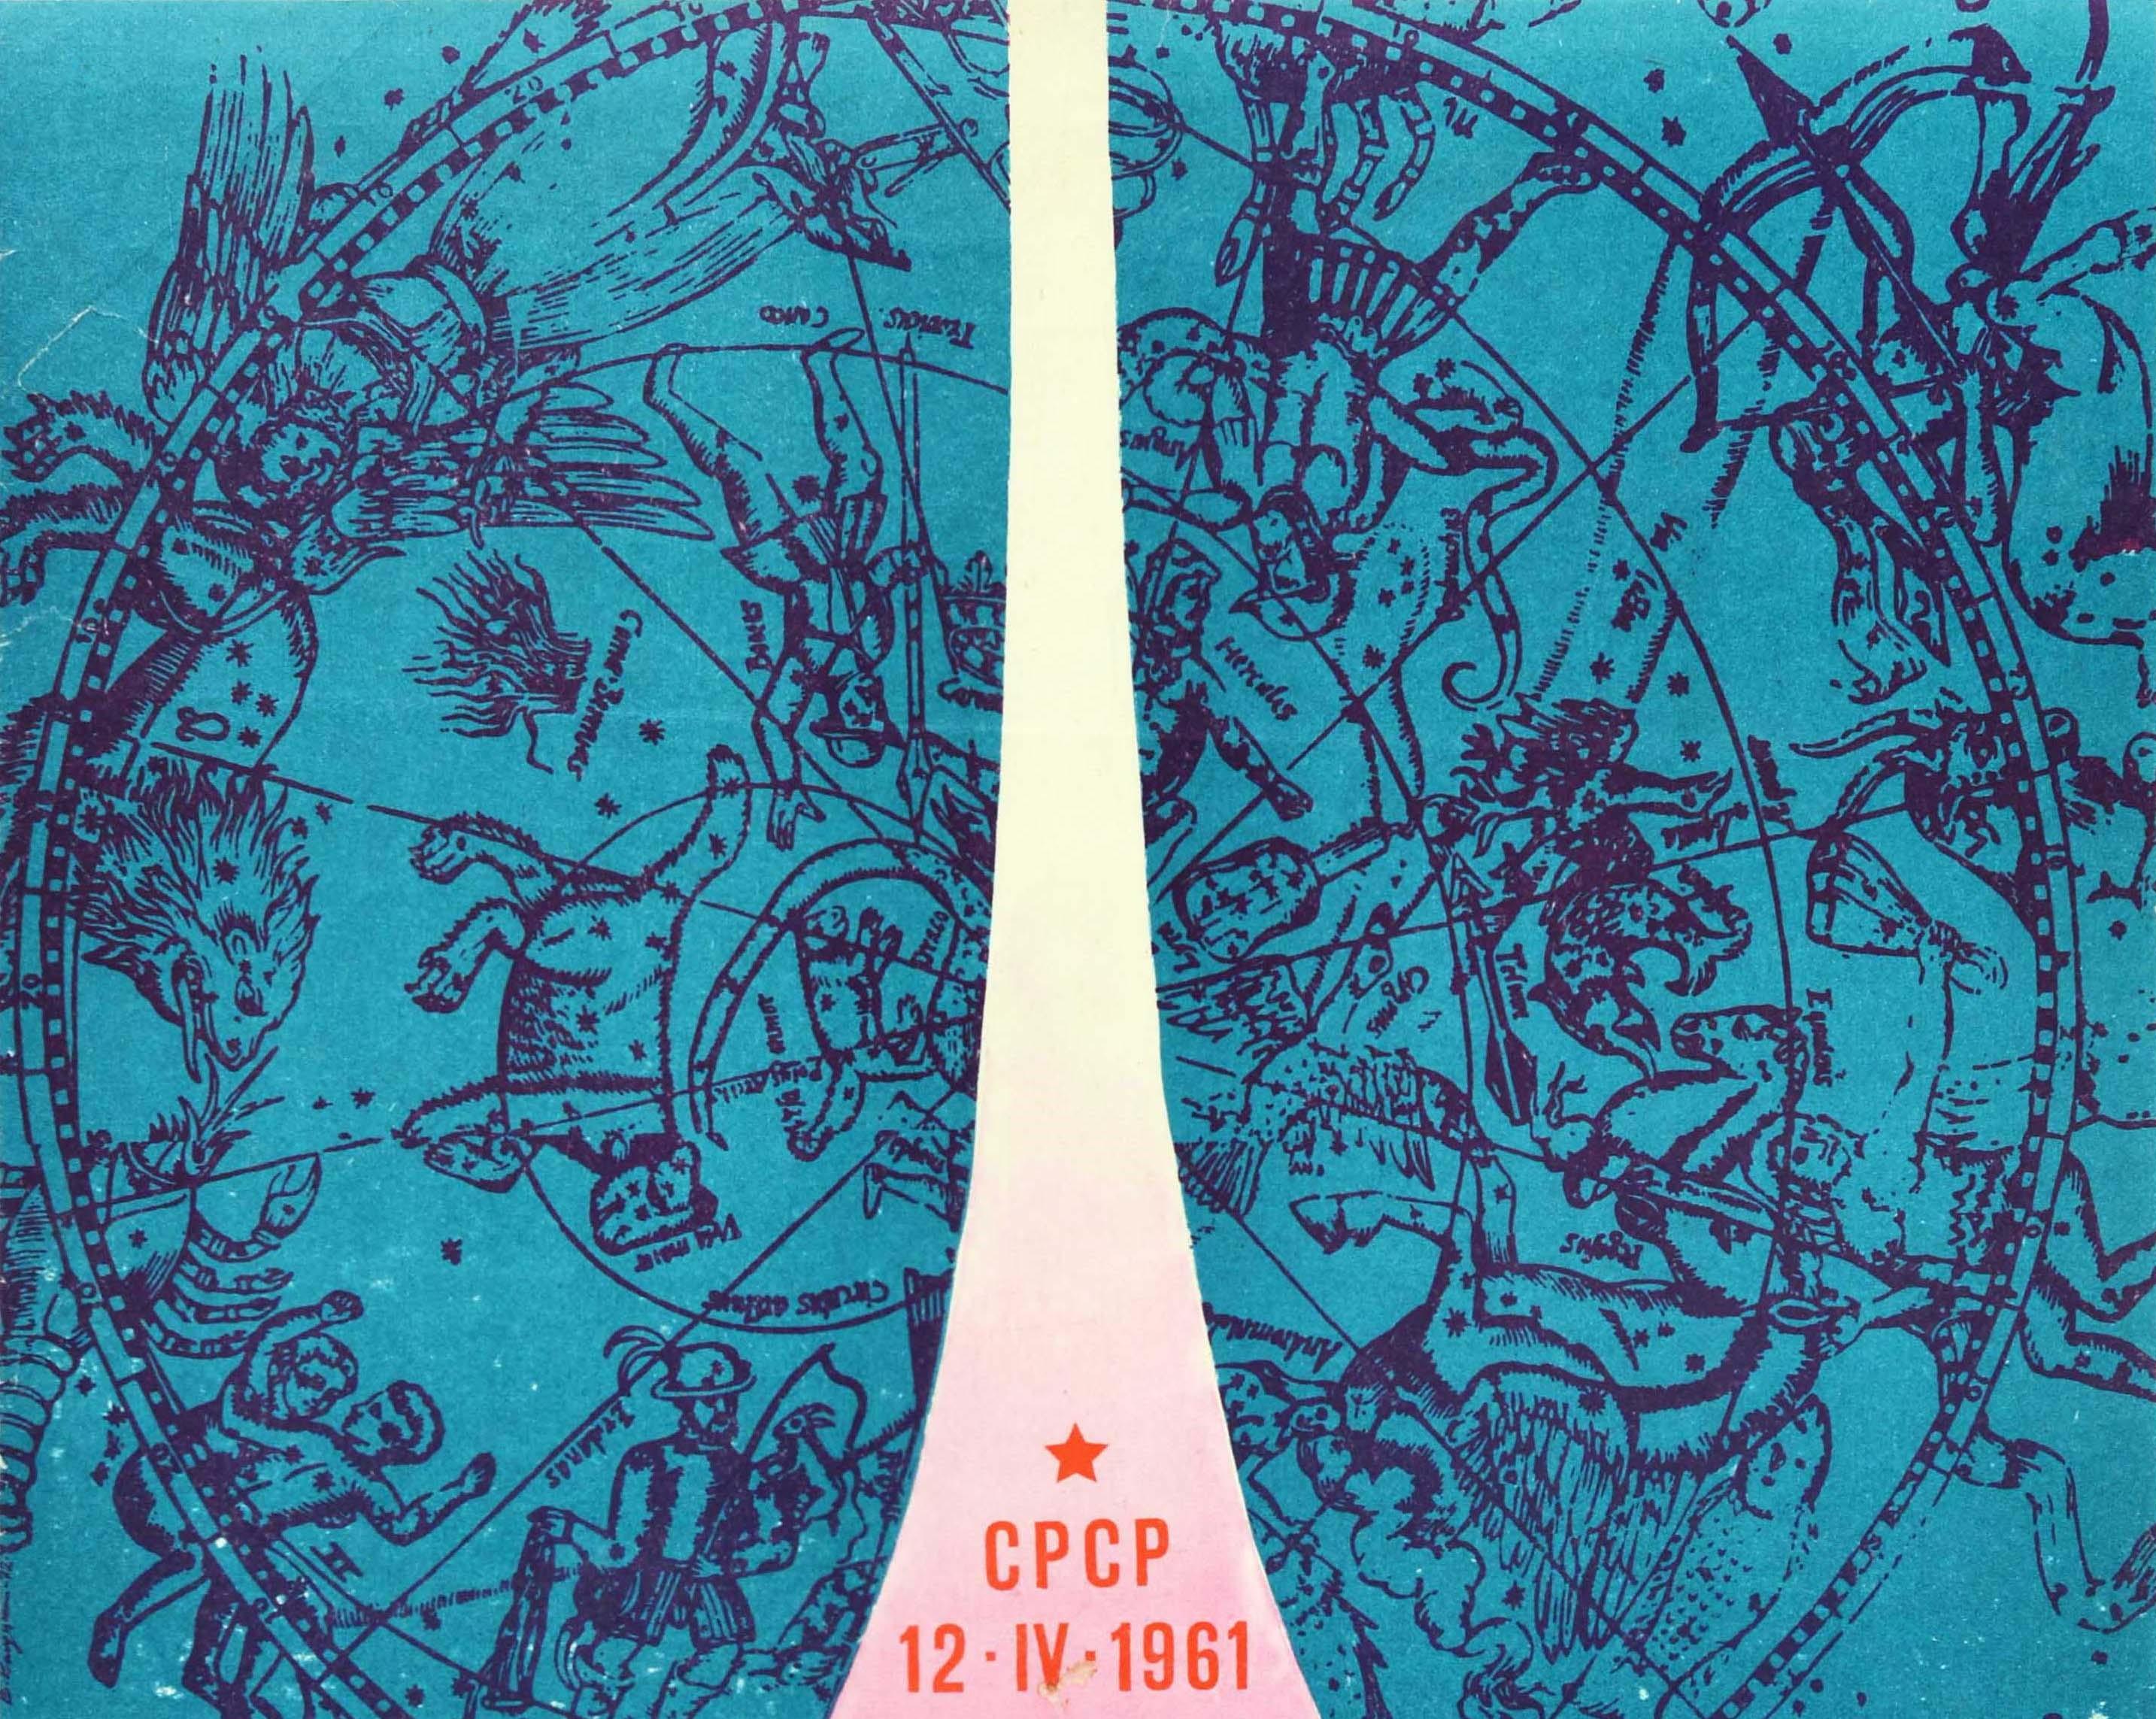 Original vintage Soviet space propaganda poster celebrating Cosmonautics Day USSR / ???? ???????????? ???? featuring a dynamic design depicting a smiling Yuri Gagarin (Yuri Alekseyevich Gagarin; 1934-1968), the Soviet pilot and cosmonaut who was the